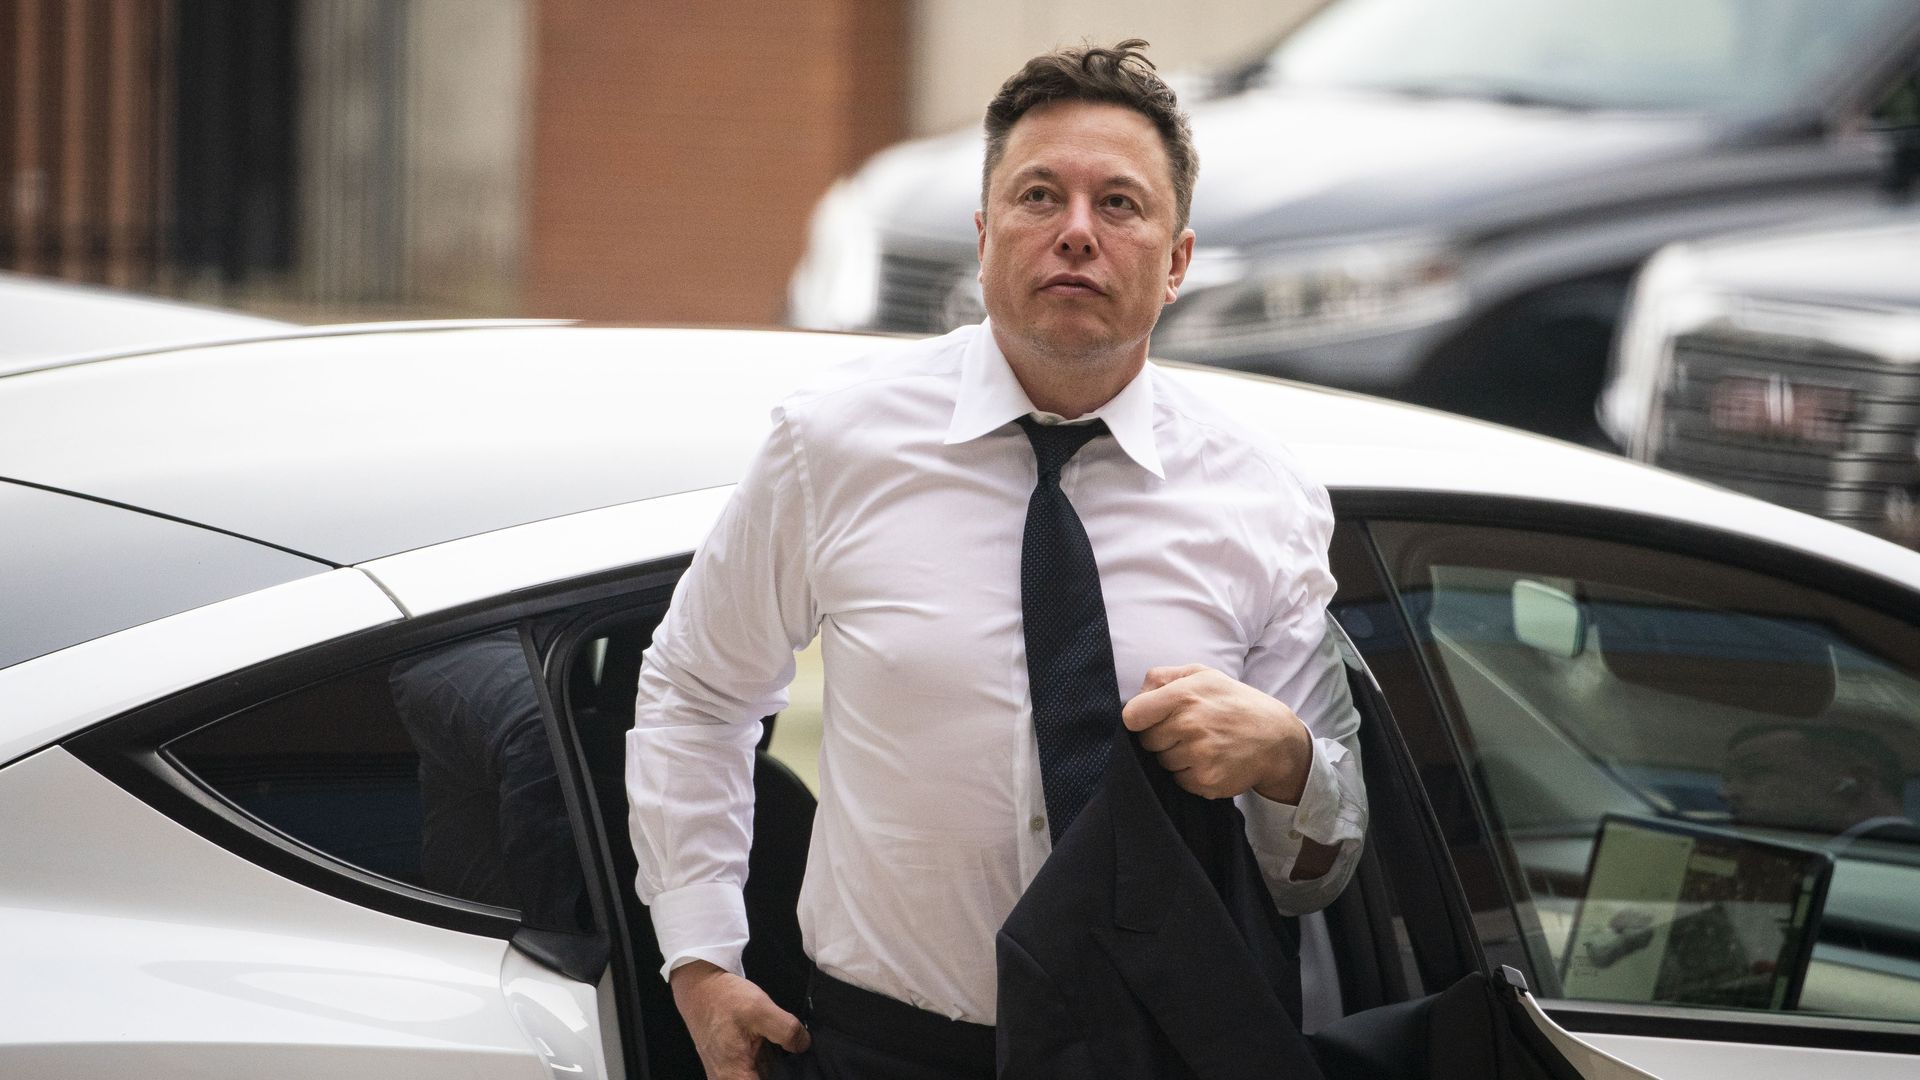 Elon Musk, chief executive officer of Tesla Inc., arrives at court during the SolarCity trial in Wilmington, Delaware, U.S., on Tuesday, July 13